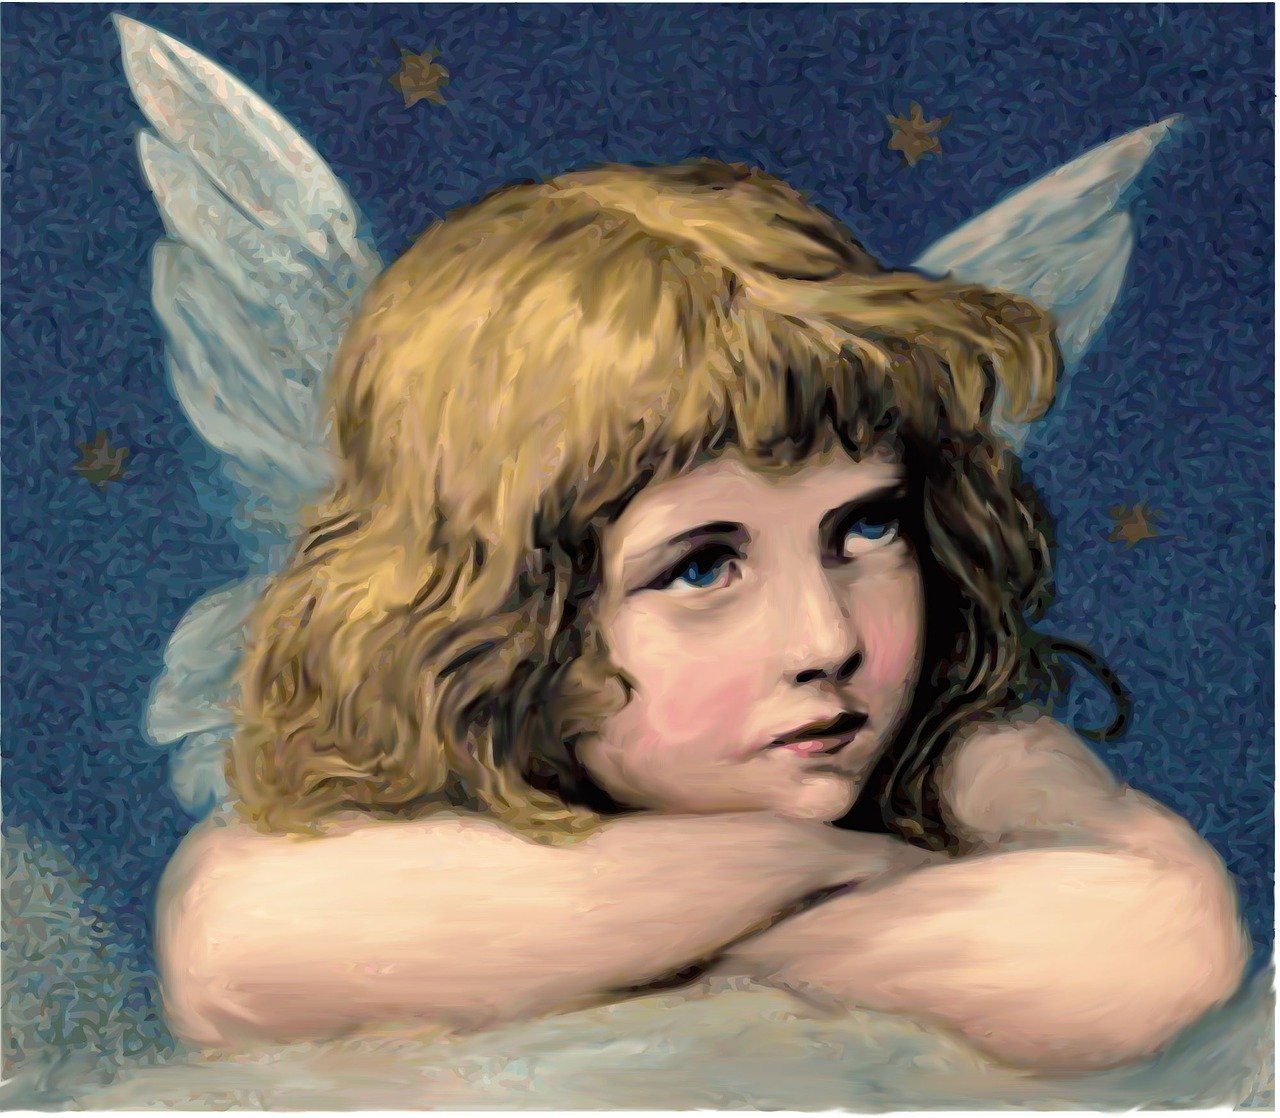 a painting of a little girl with angel wings, a digital rendering, inspired by Sophie Anderson, flickr, medium detail, santa, pensive and hopeful expression, boy